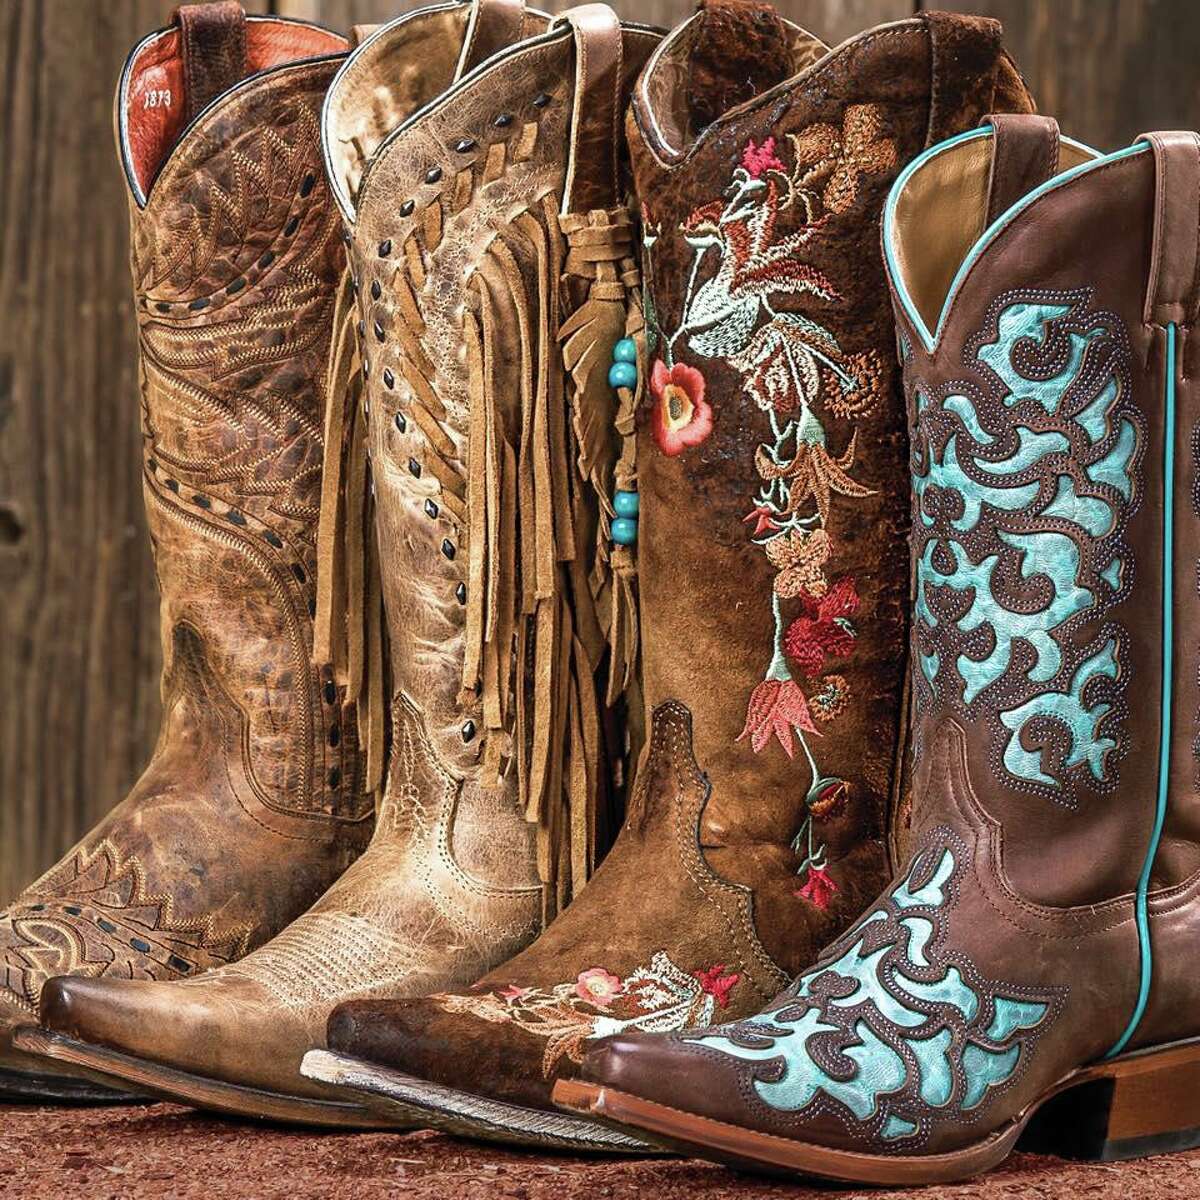 All Women's Boots & Shoes - Boot Barn